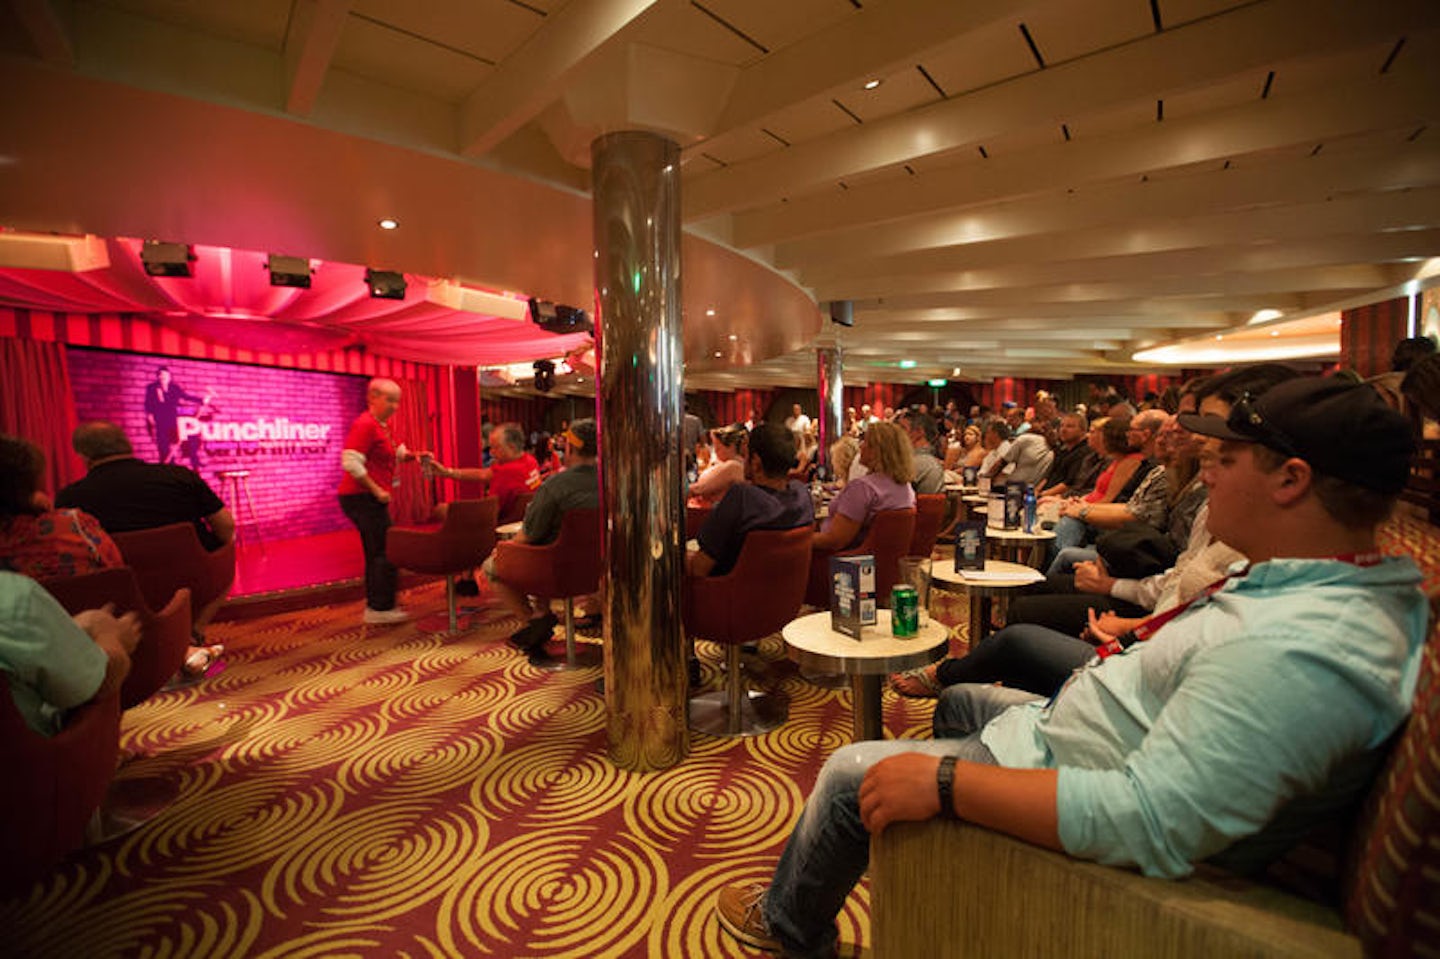 The PunchLiner Comedy Club on Carnival Sunshine